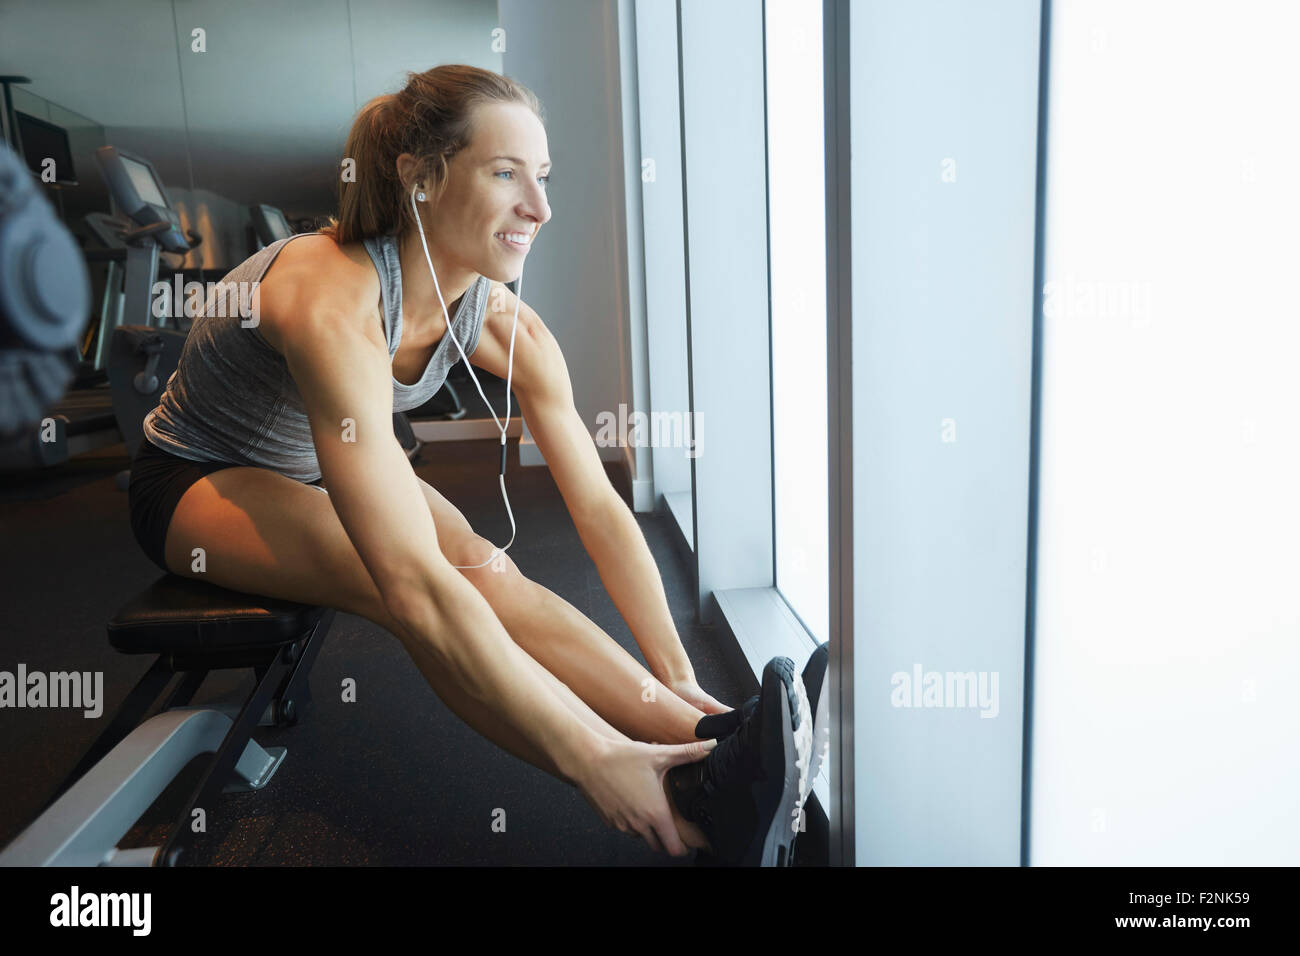 Smiling woman stretching in gym Stock Photo